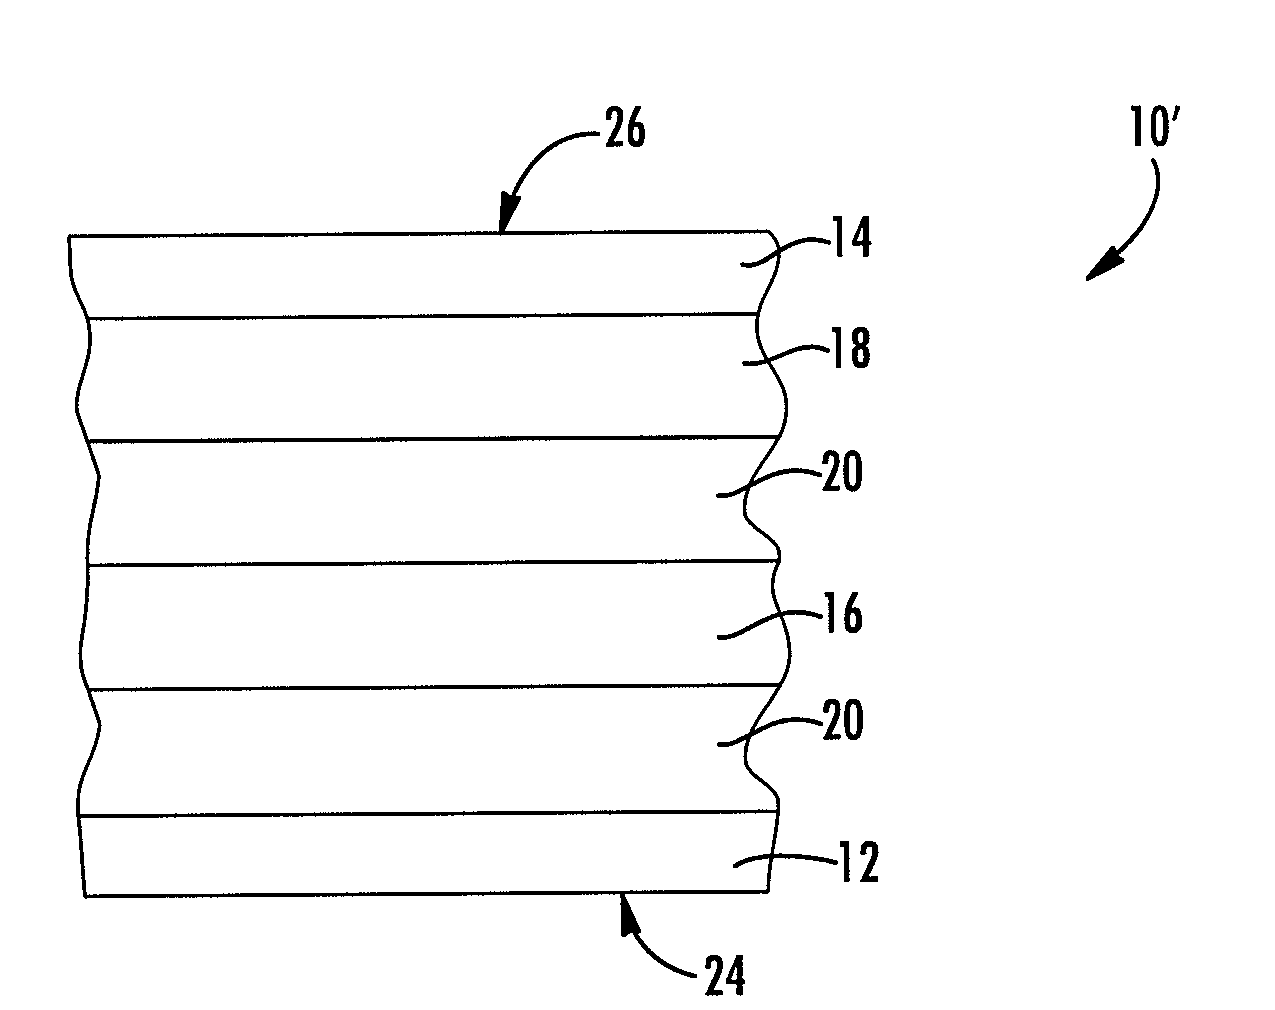 Multilayer Film Having Active Oxygen Barrier Layer and Iron-Based Oxygen Scavenging Layer